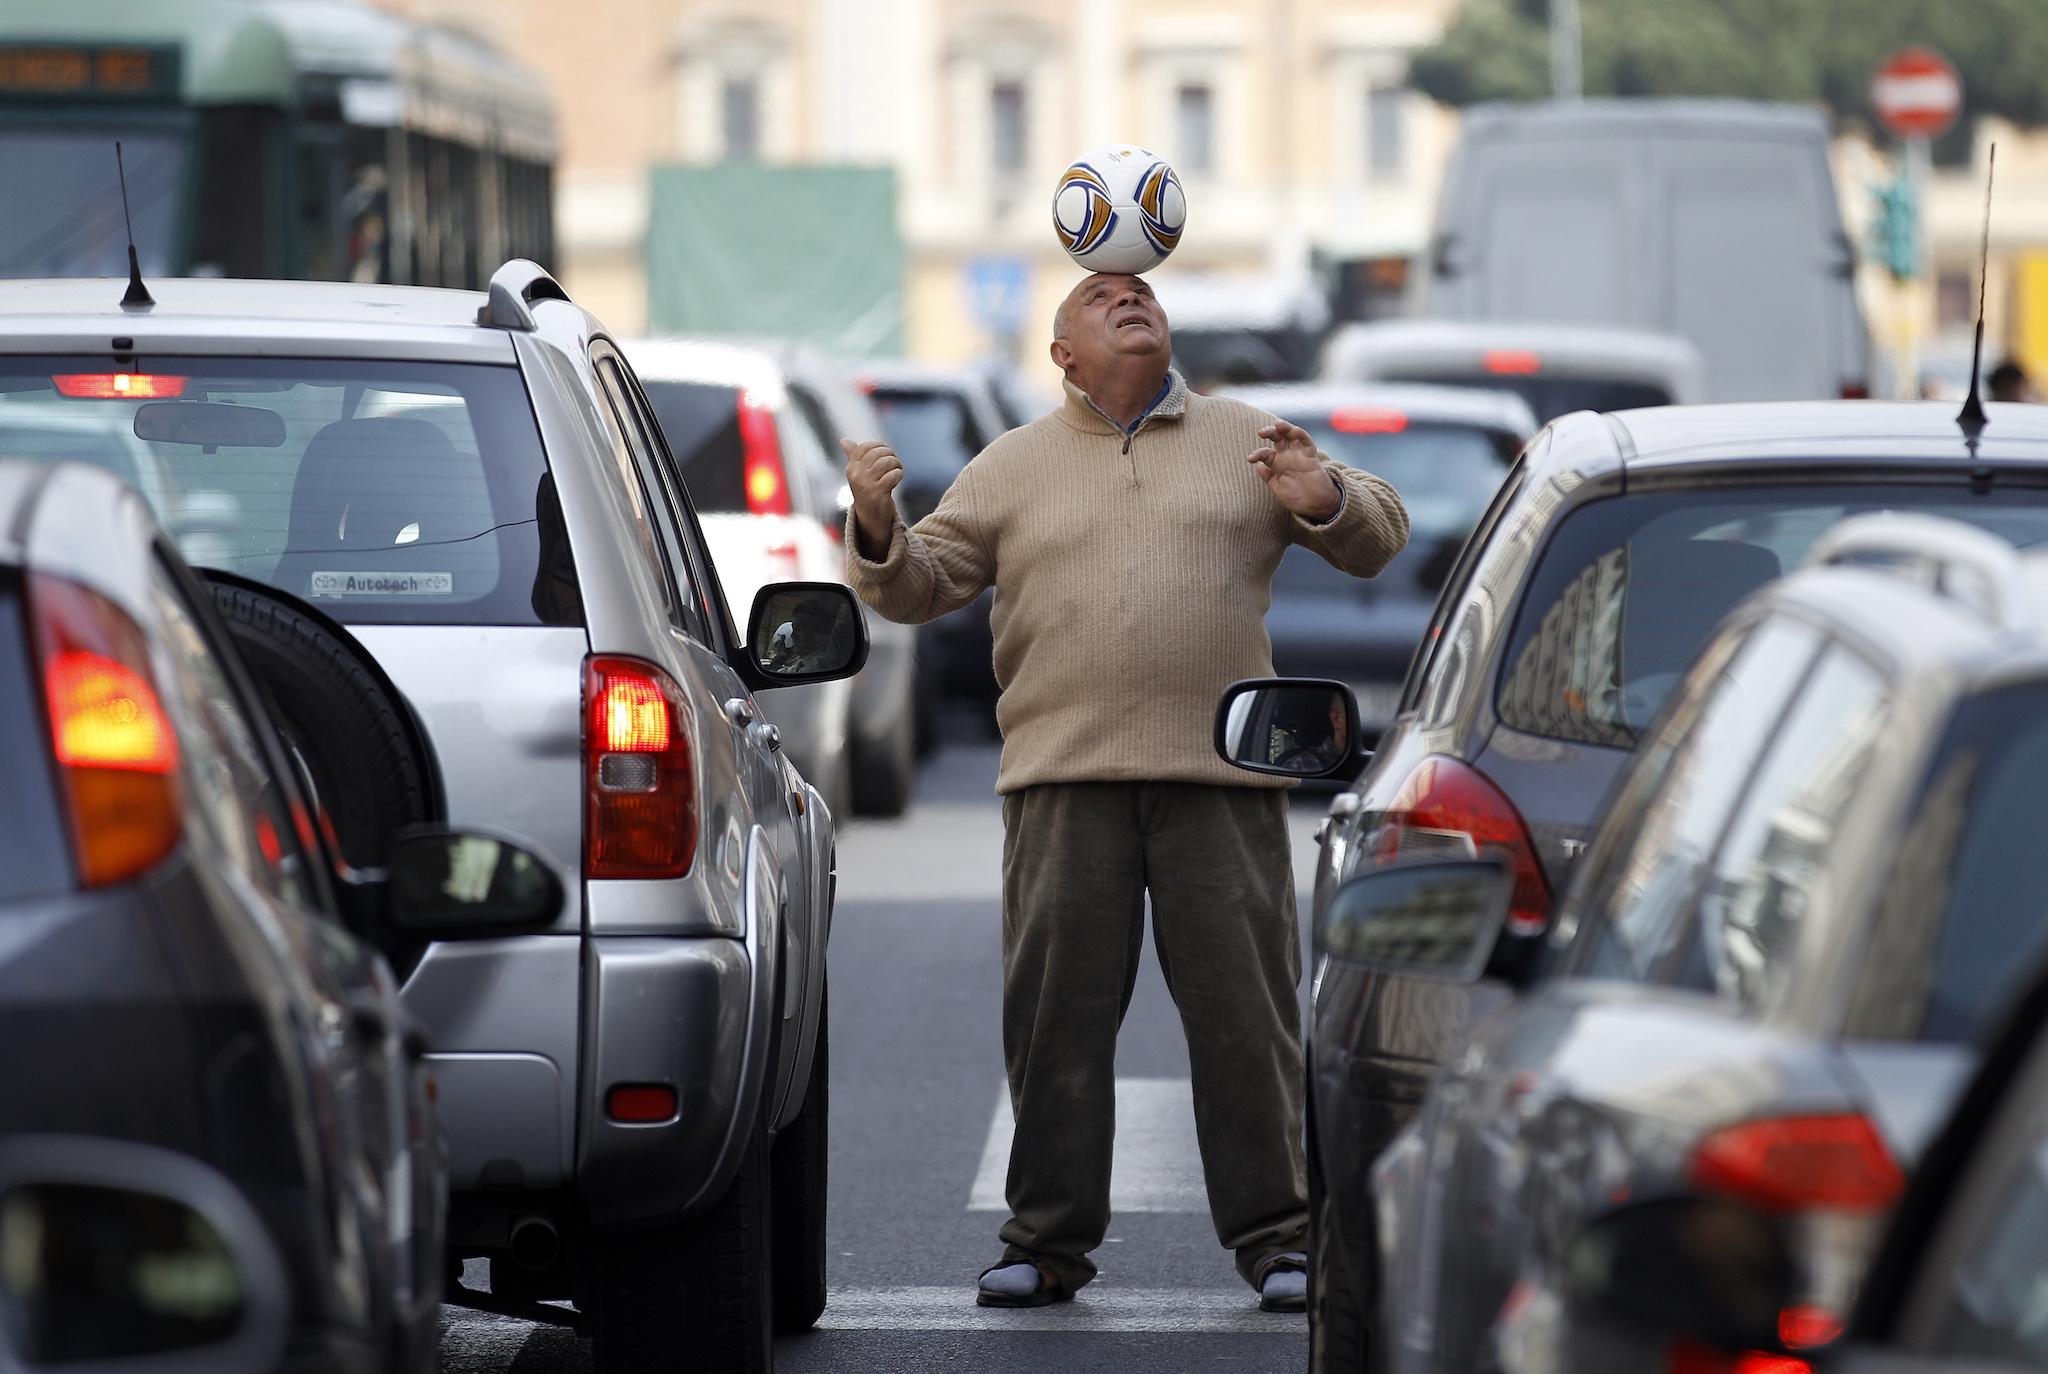 A man balances a soccer ball on his head amongst cars stopped in a traffic jam in Rome April 4, 2012